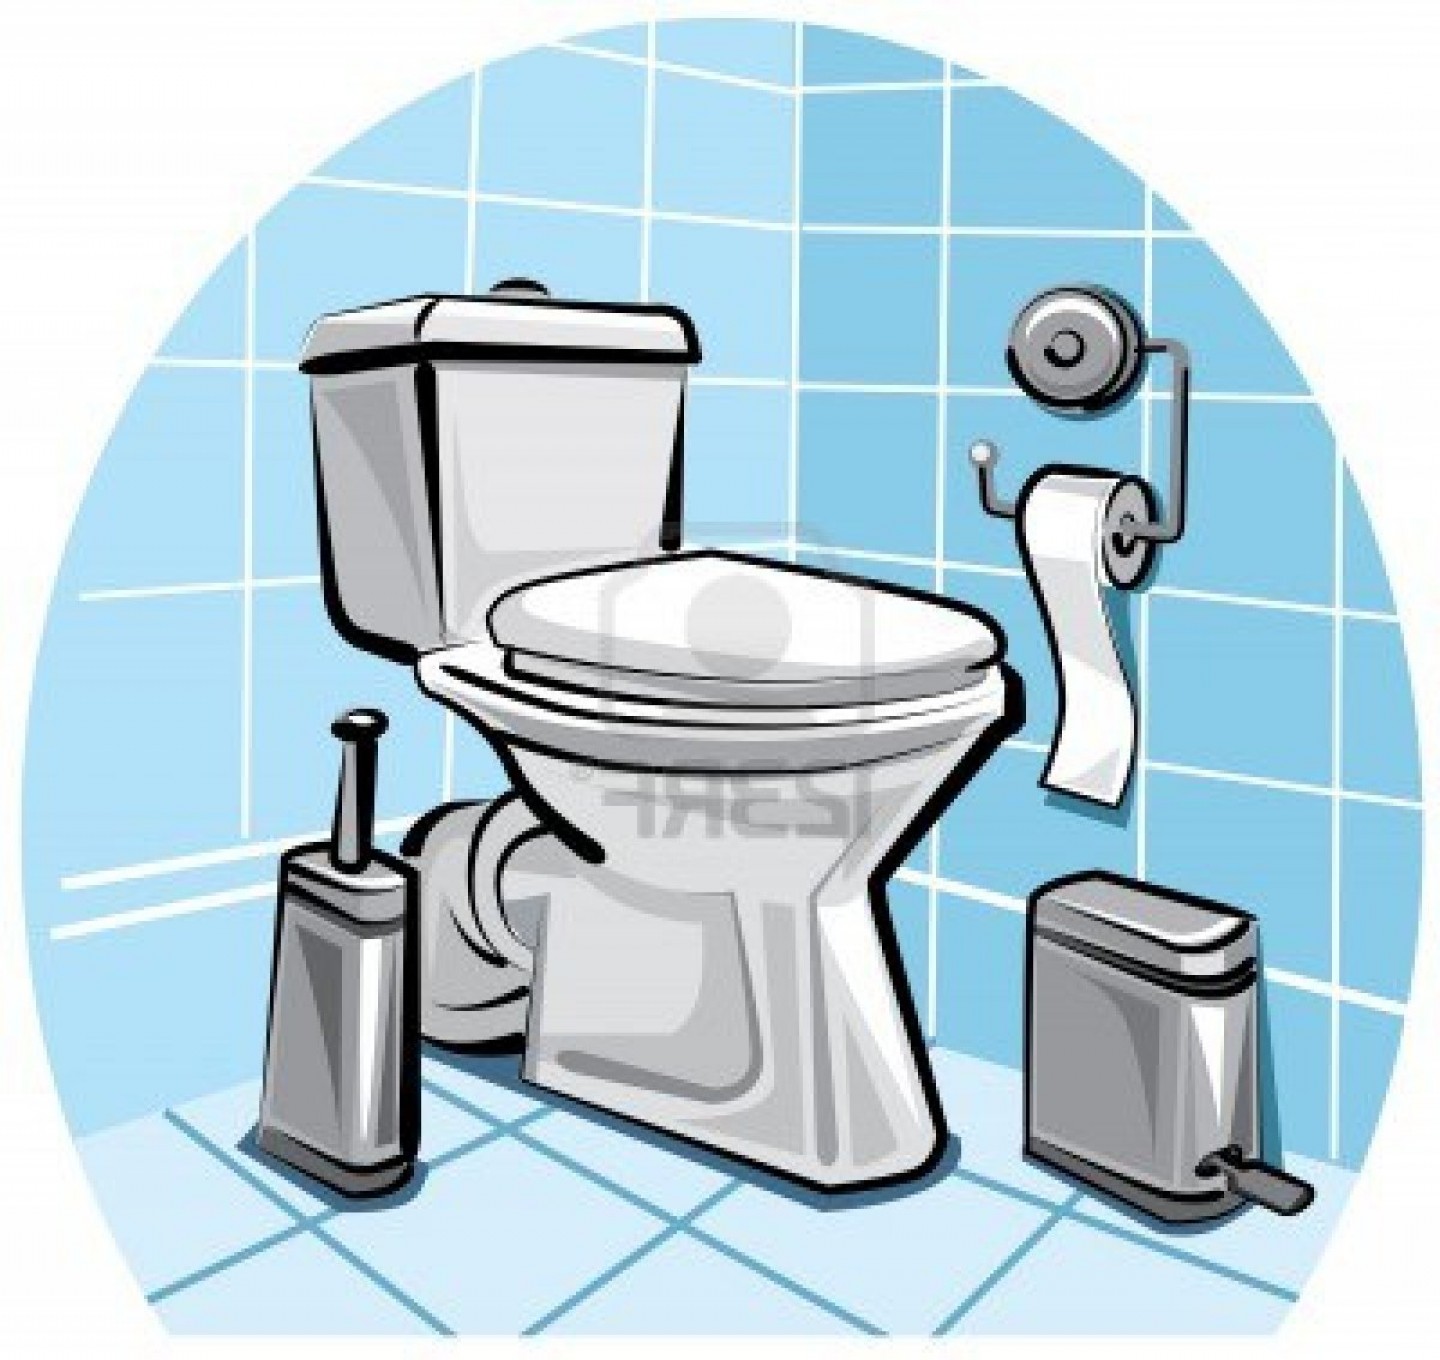 Clean The Bathroom Clipart - Polish your personal project or design ...